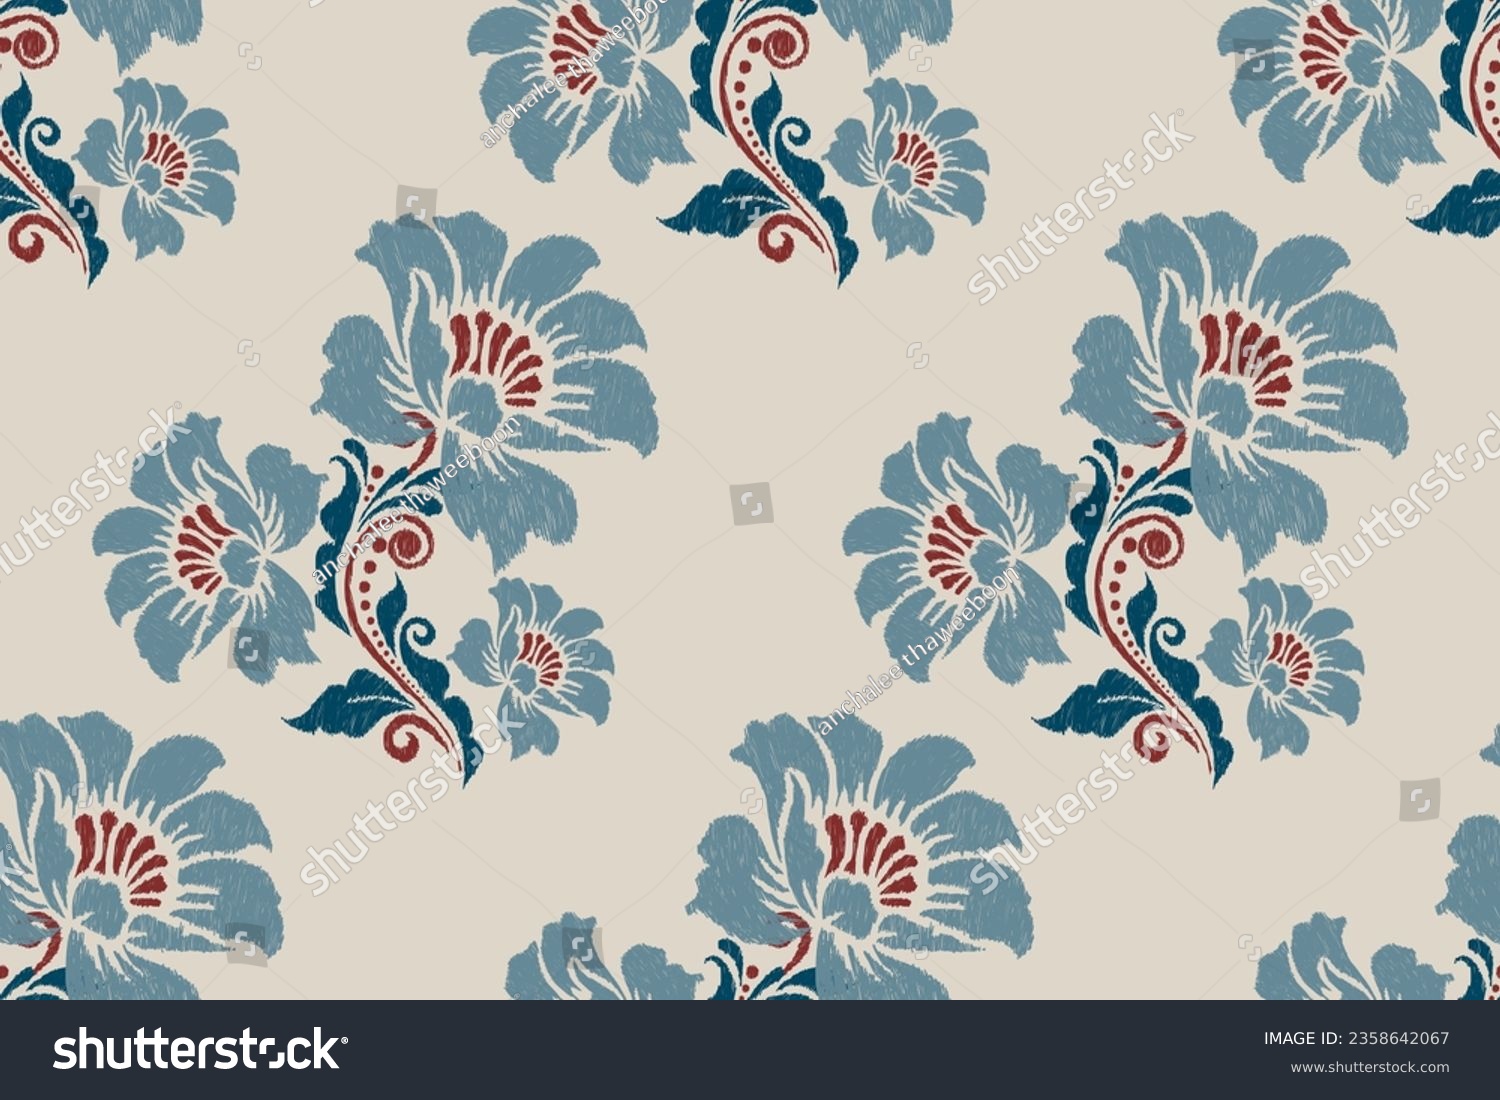 SVG of Ikat floral paisley embroidery on gray background.Ikat ethnic oriental seamless pattern traditional.Aztec style abstract vector illustration.design for texture,fabric,clothing,wrapping,decoration. svg